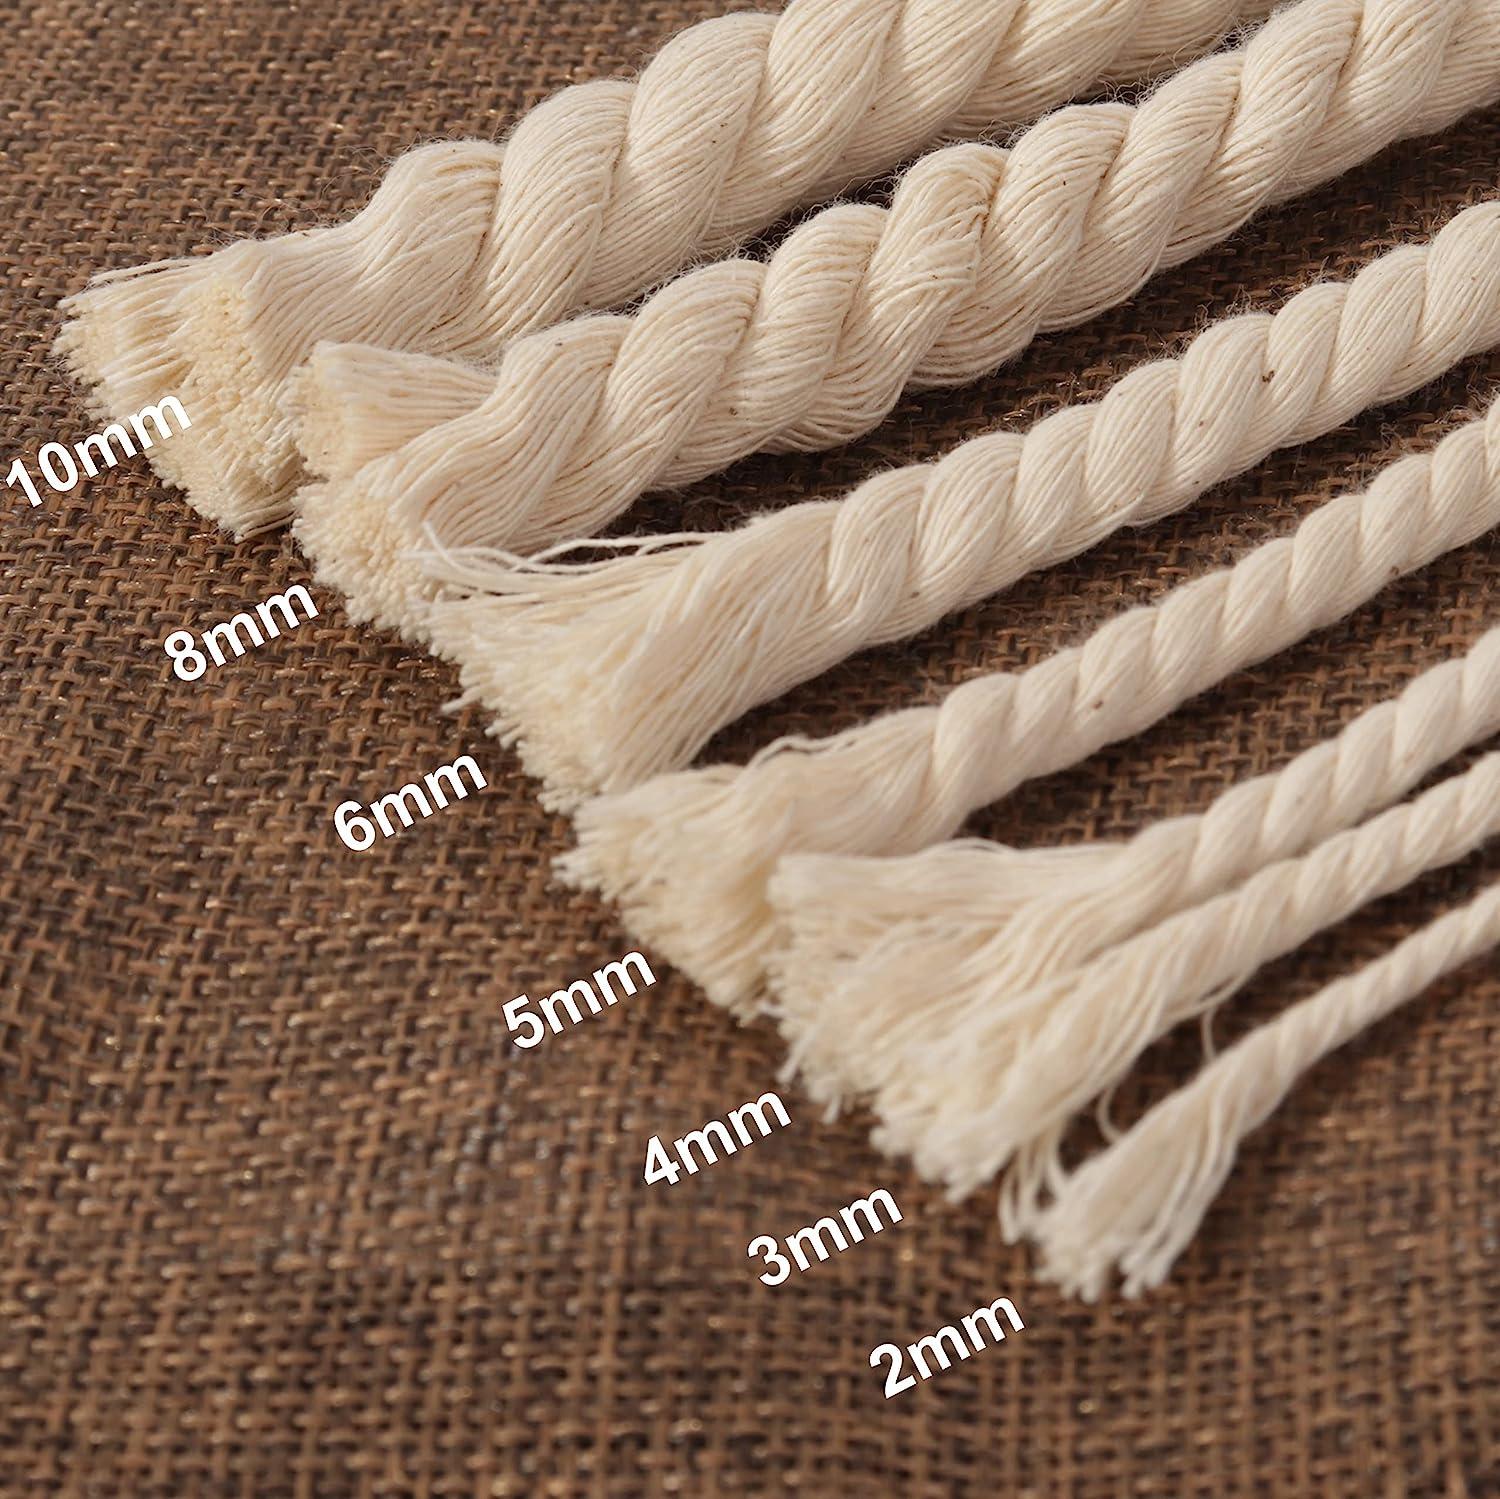 XKDOUS Macrame Cord 4mm x 150Yards Natural Cotton Macrame Rope 3 Strand  Twisted Cotton Cord for Wall Hanging Plant Hangers Crafts Knitting  Decorative Projects Soft Undyed Cotton Rope Natural Color 4mm x